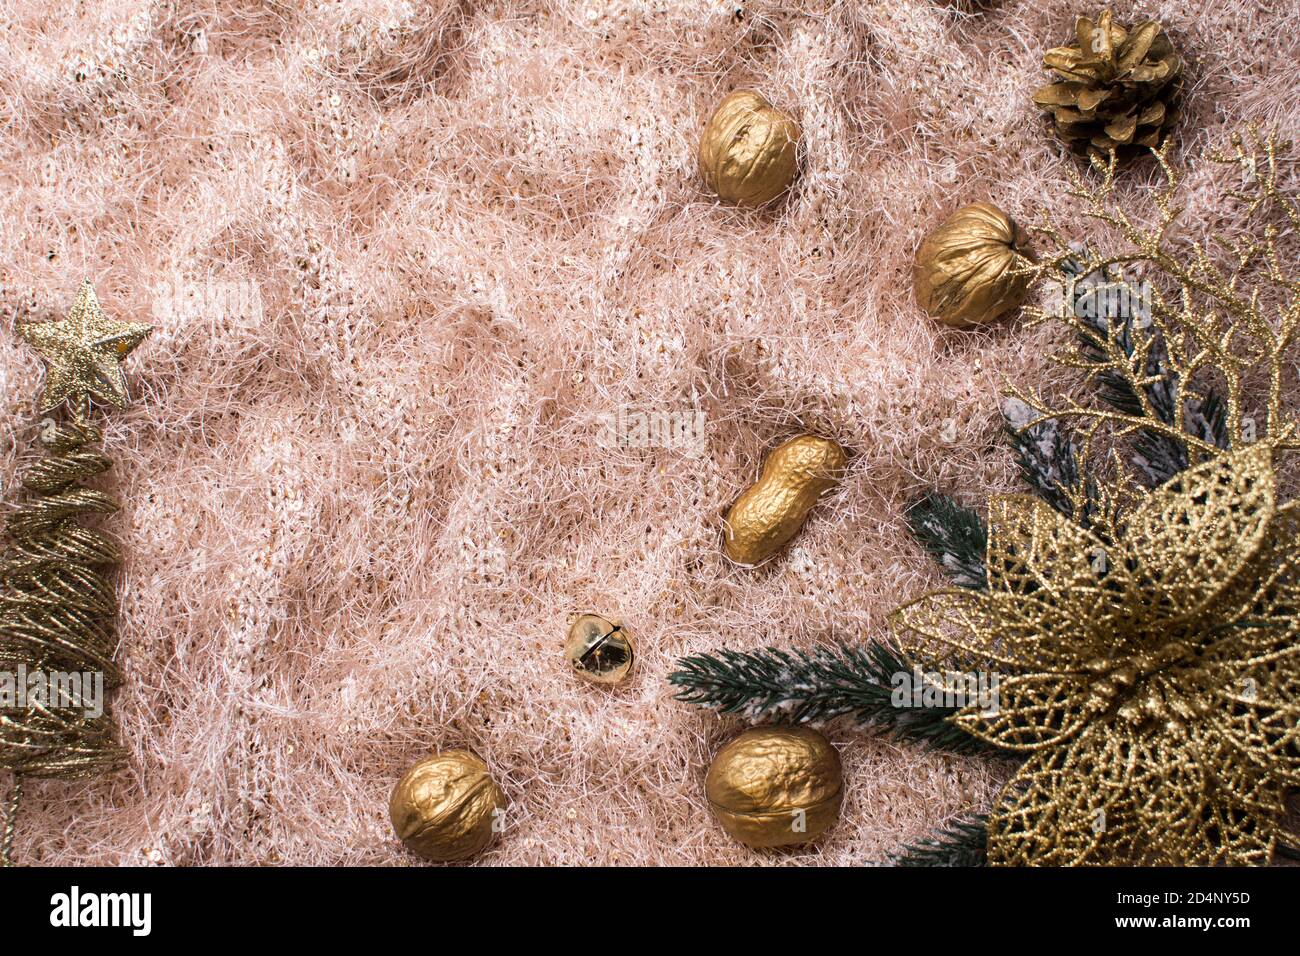 christmas layout on fabric background. paraphernalia. Christmas tree branches, golden nuts, spruce branch. Stock Photo